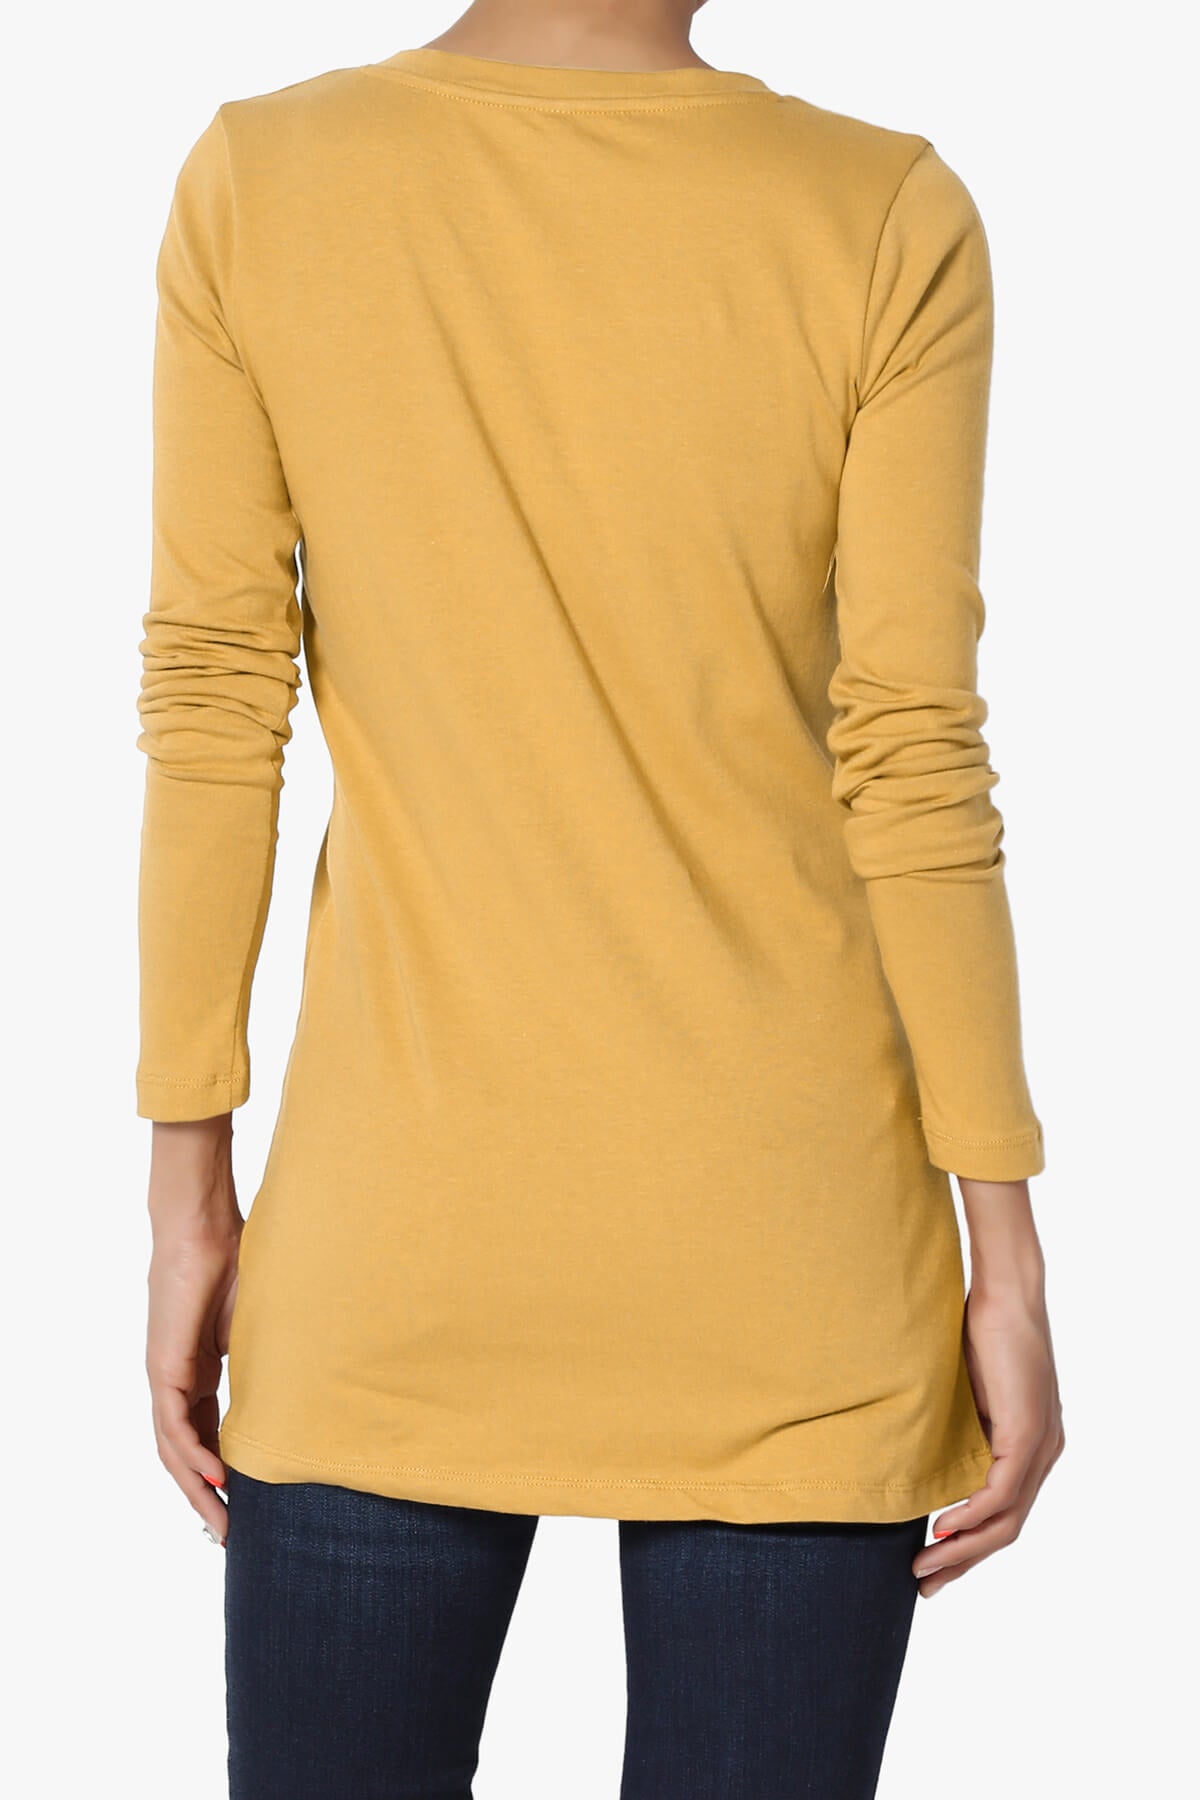 Load image into Gallery viewer, Lasso Cotton V-Neck Long Sleeve Tee LIGHT MUSTARD_2
